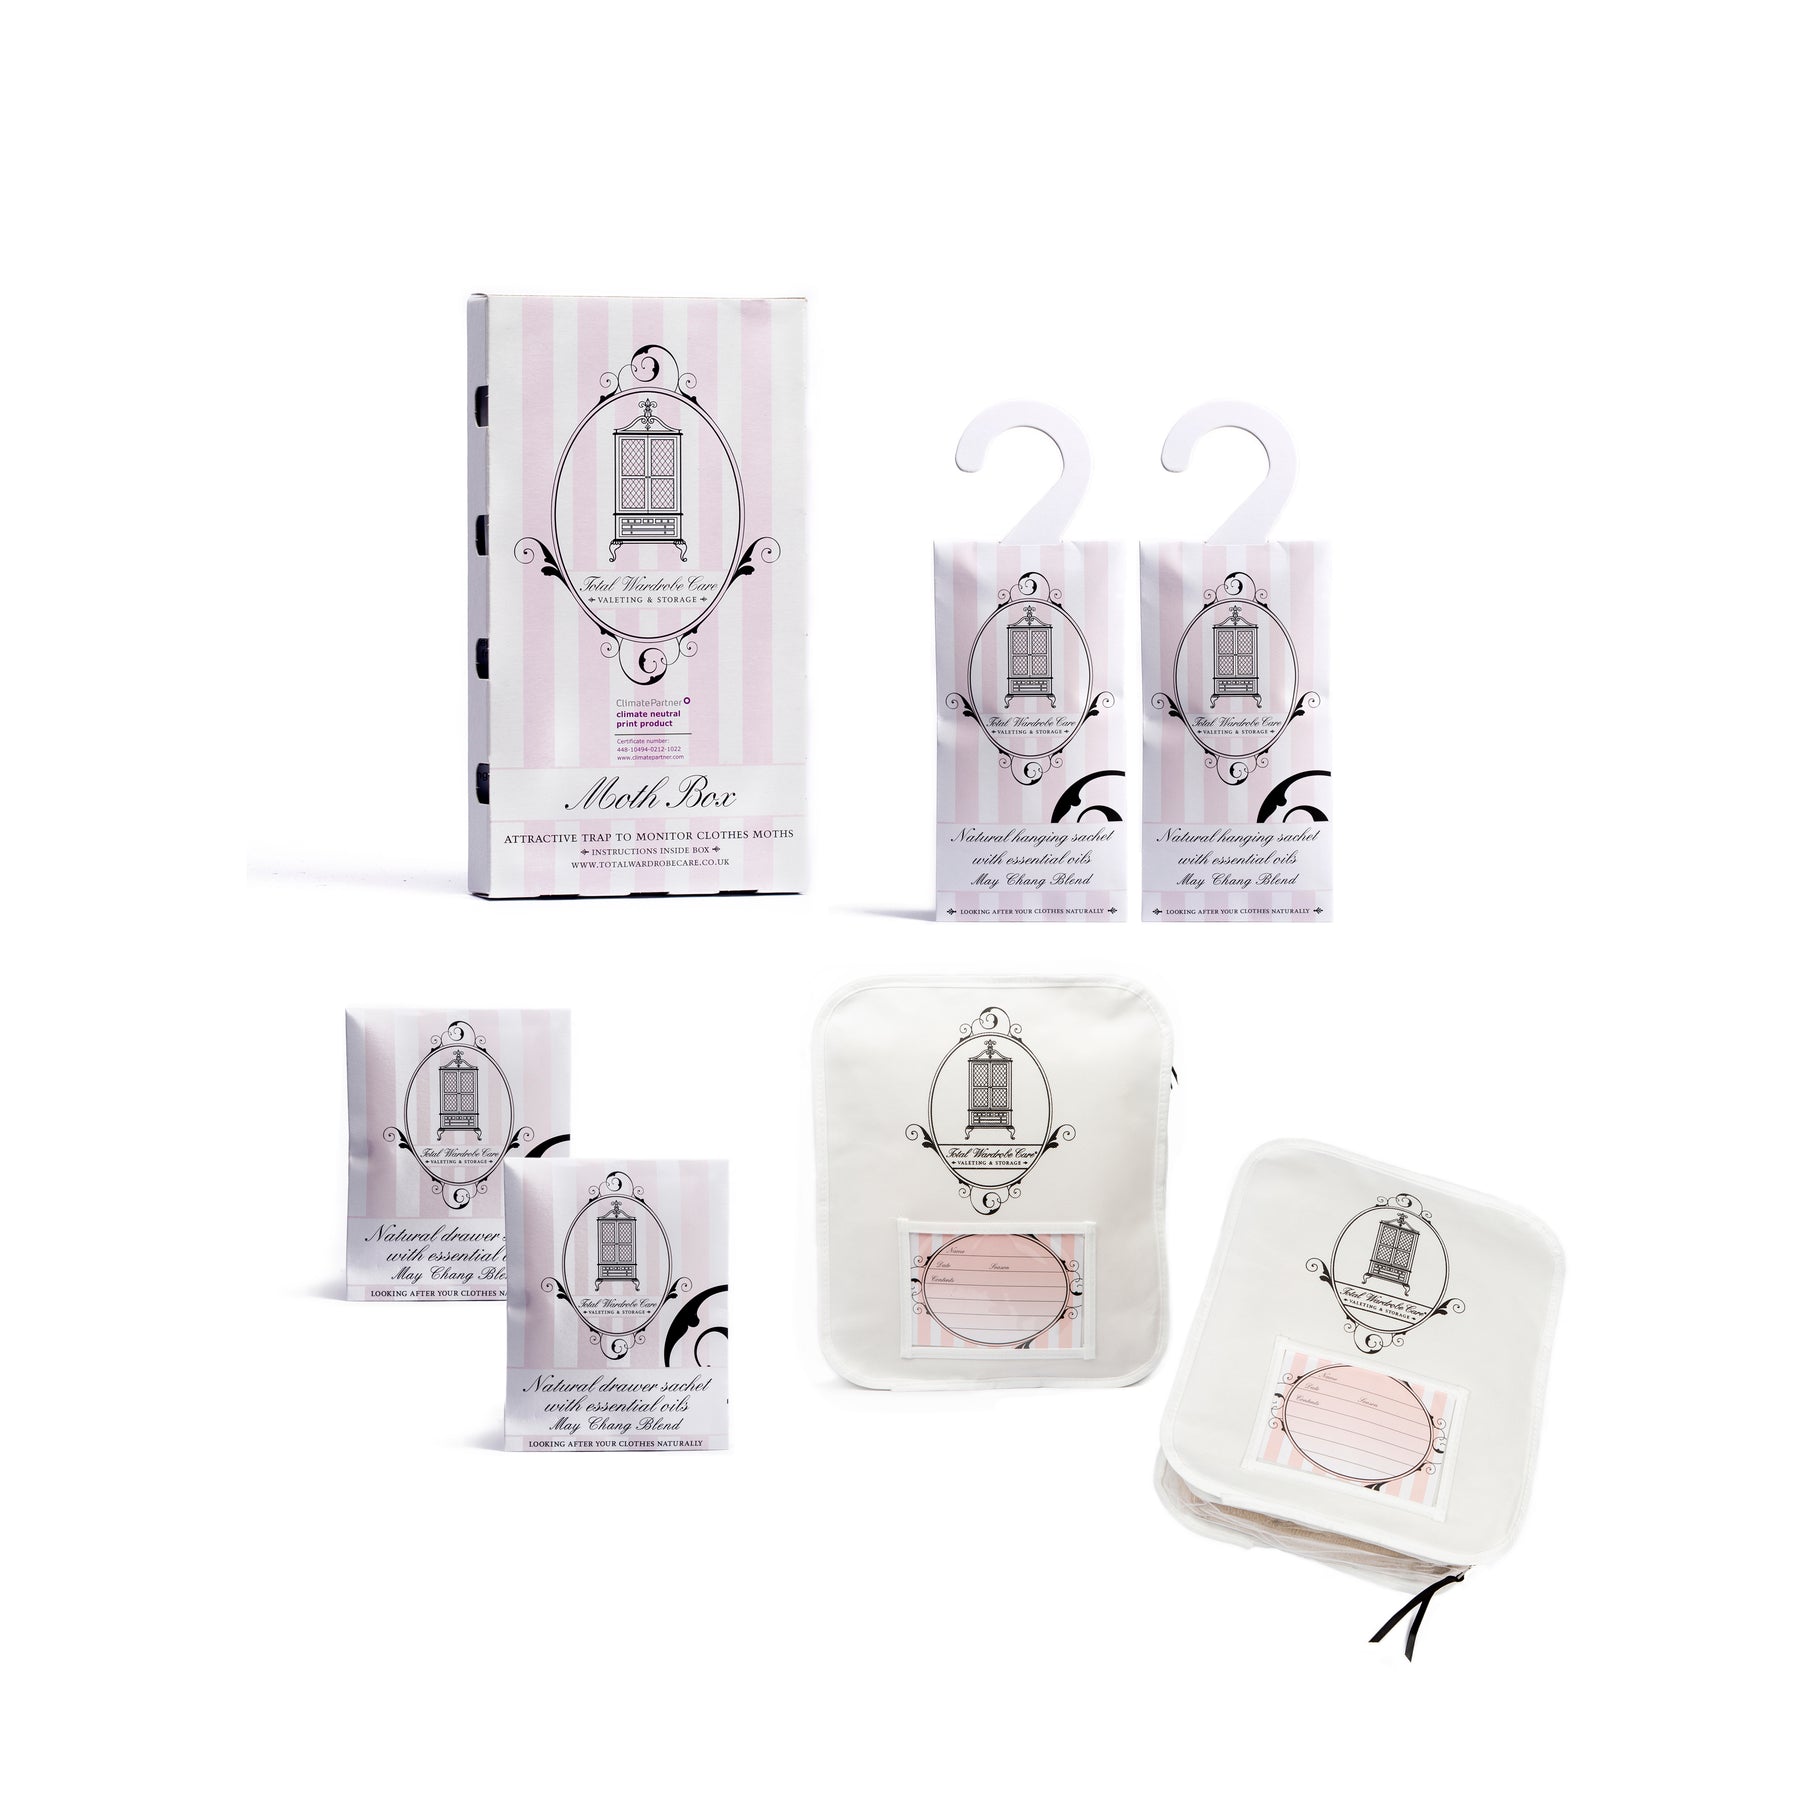 Range of products from moth box, hanging sachets, drawer sachets and storage bags